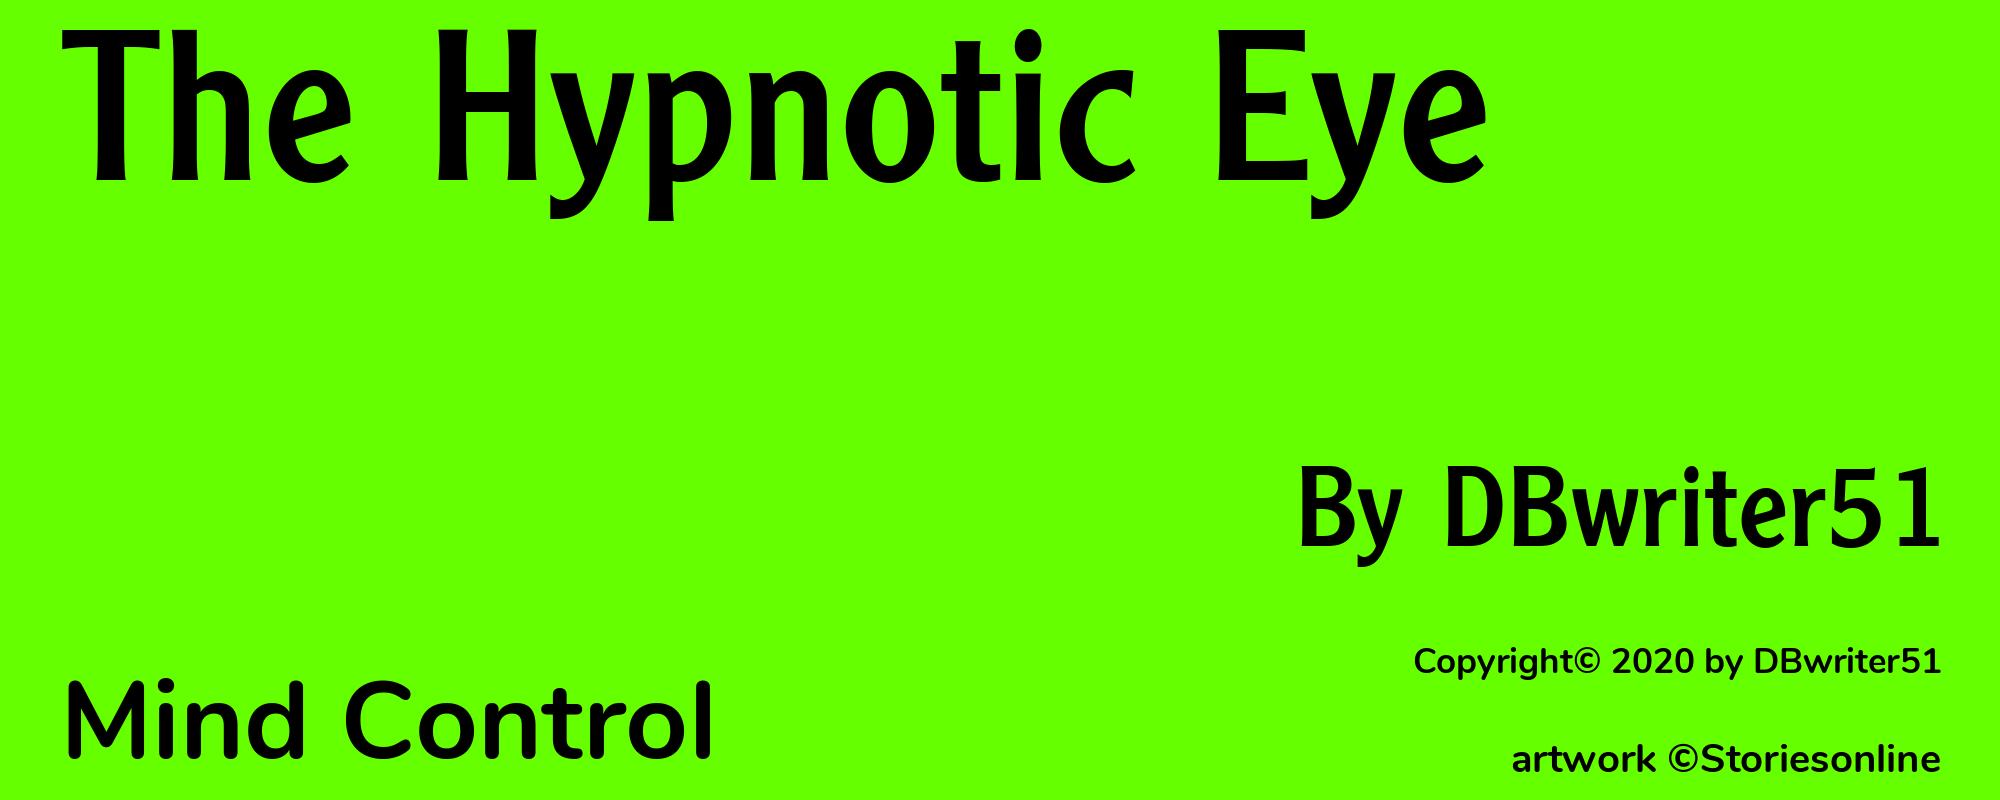 The Hypnotic Eye - Cover